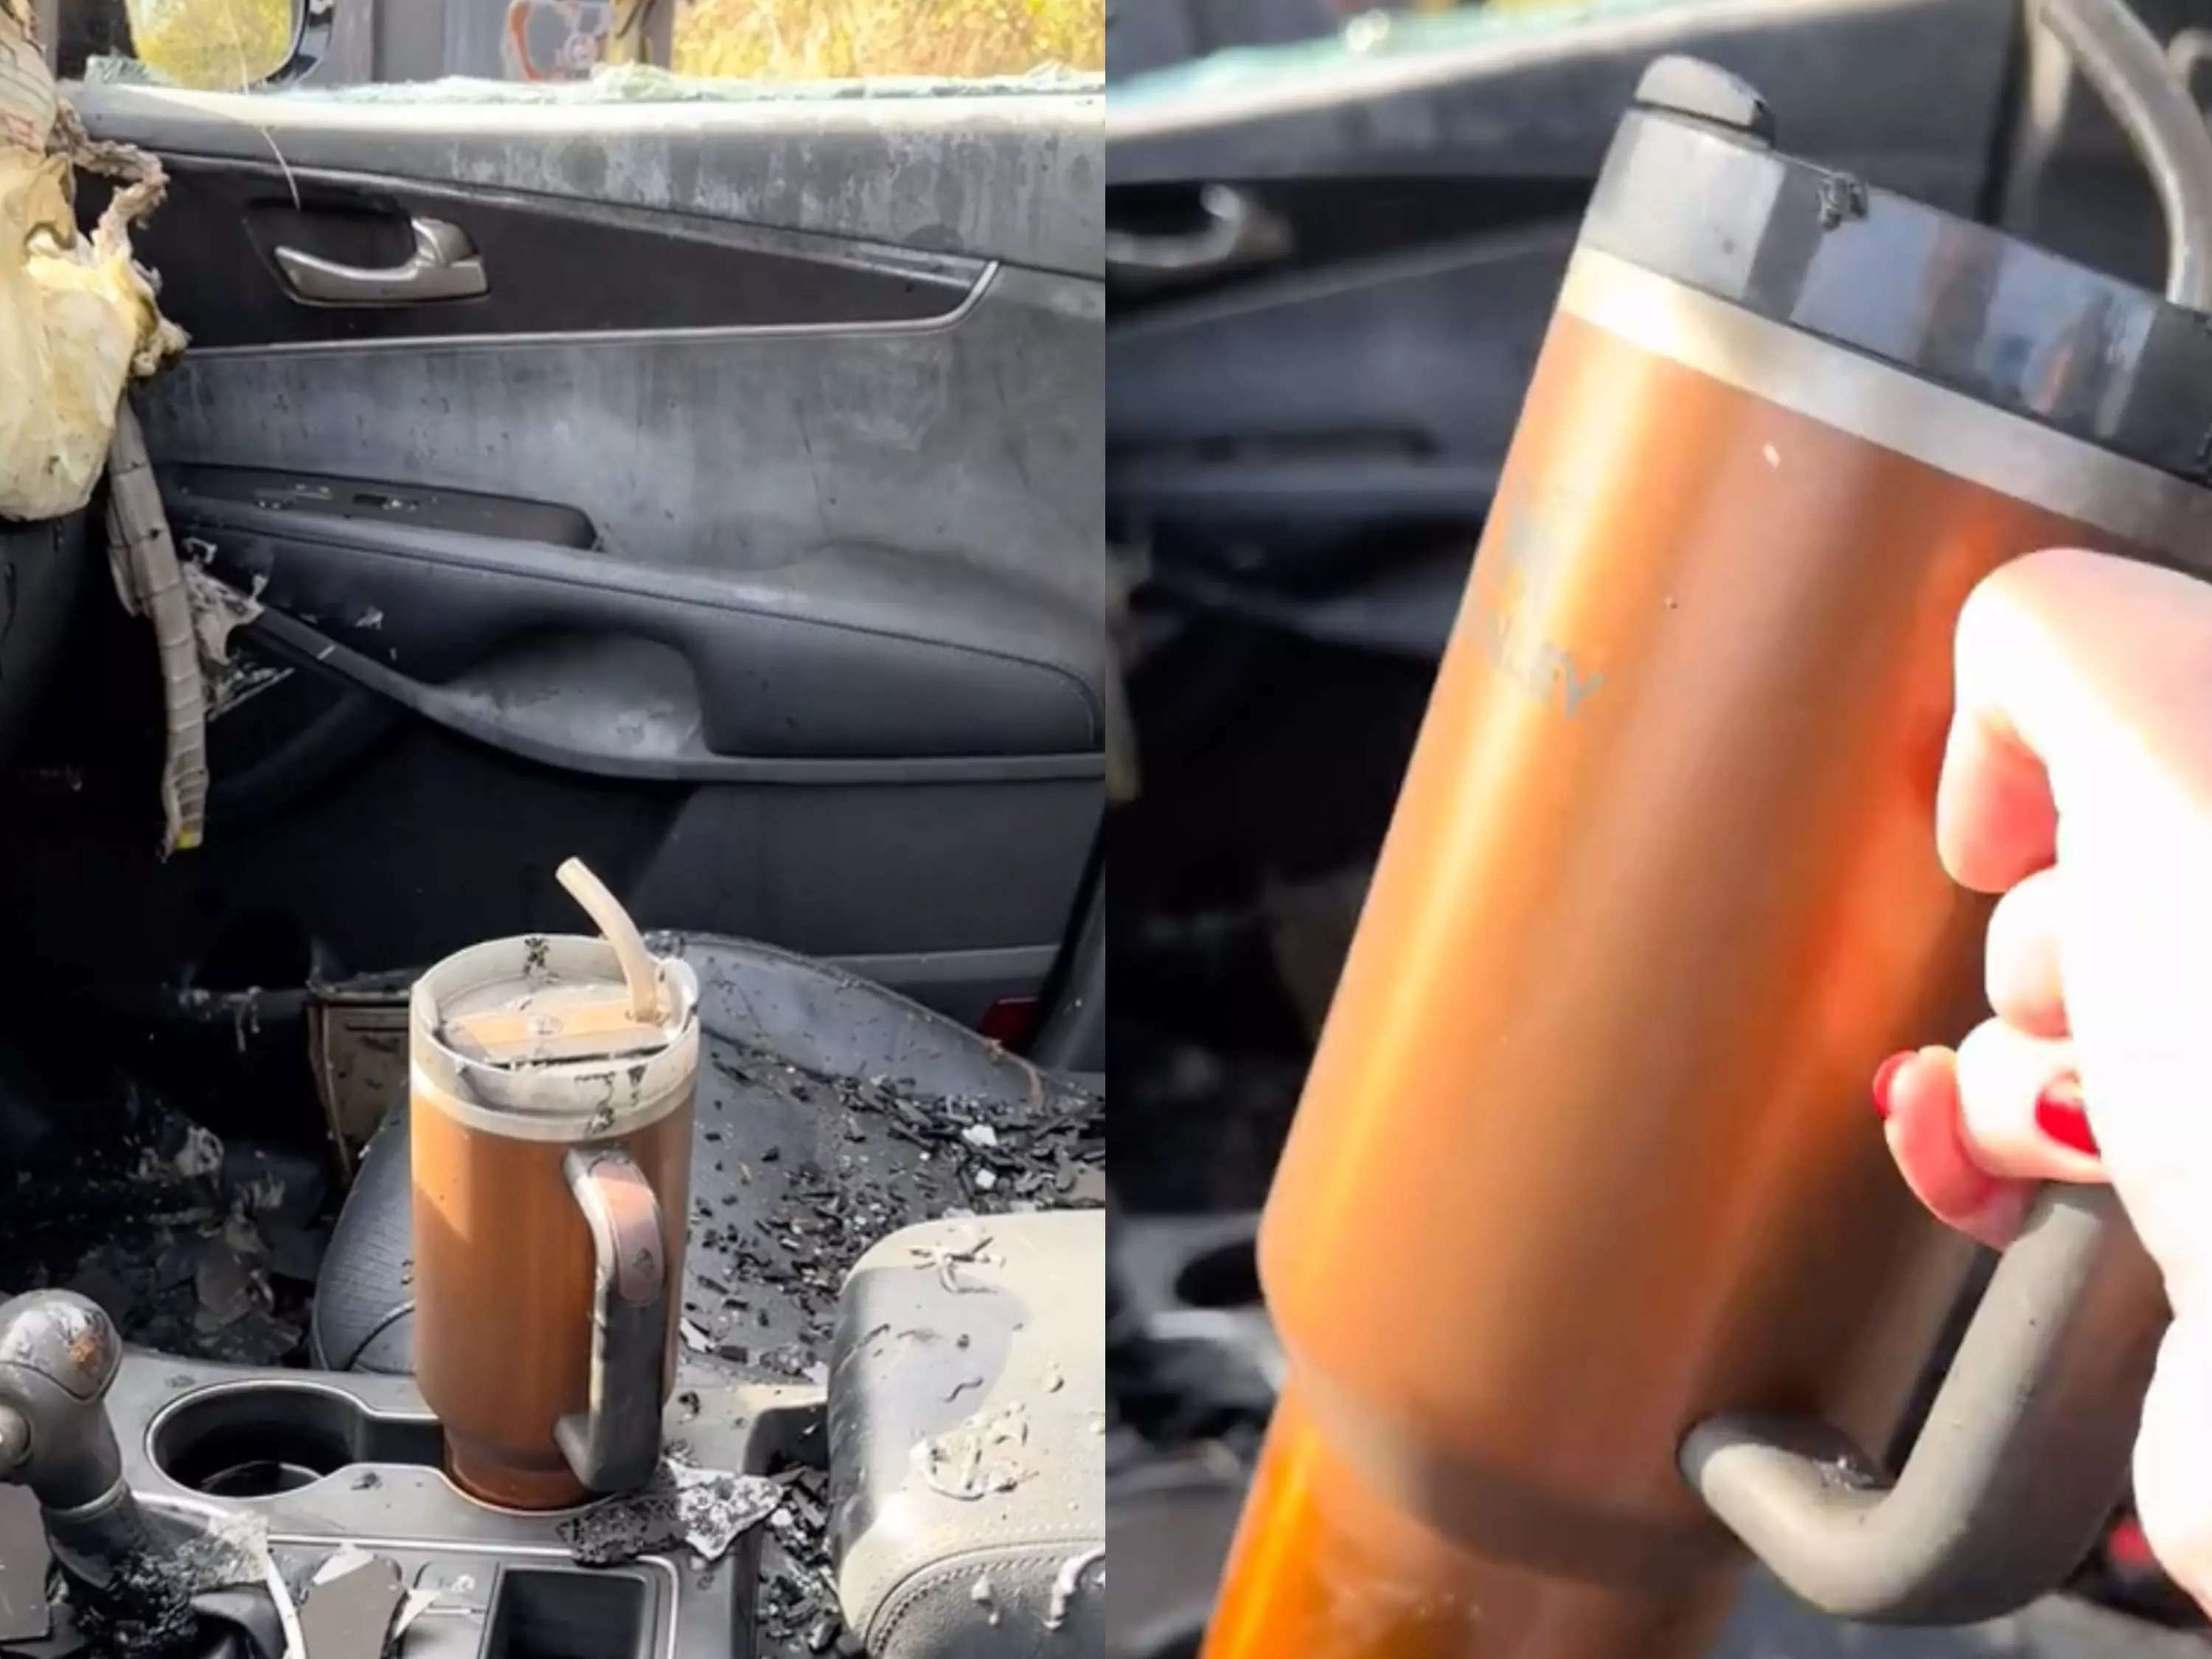 https://www.businessinsider.in/photo/105295297/a-woman-who-went-viral-on-tiktok-after-saying-the-ice-in-her-insulated-stanley-cup-survived-a-car-fire-is-being-offered-a-new-car-by-the-bottle-brand.jpg?imgsize=149888